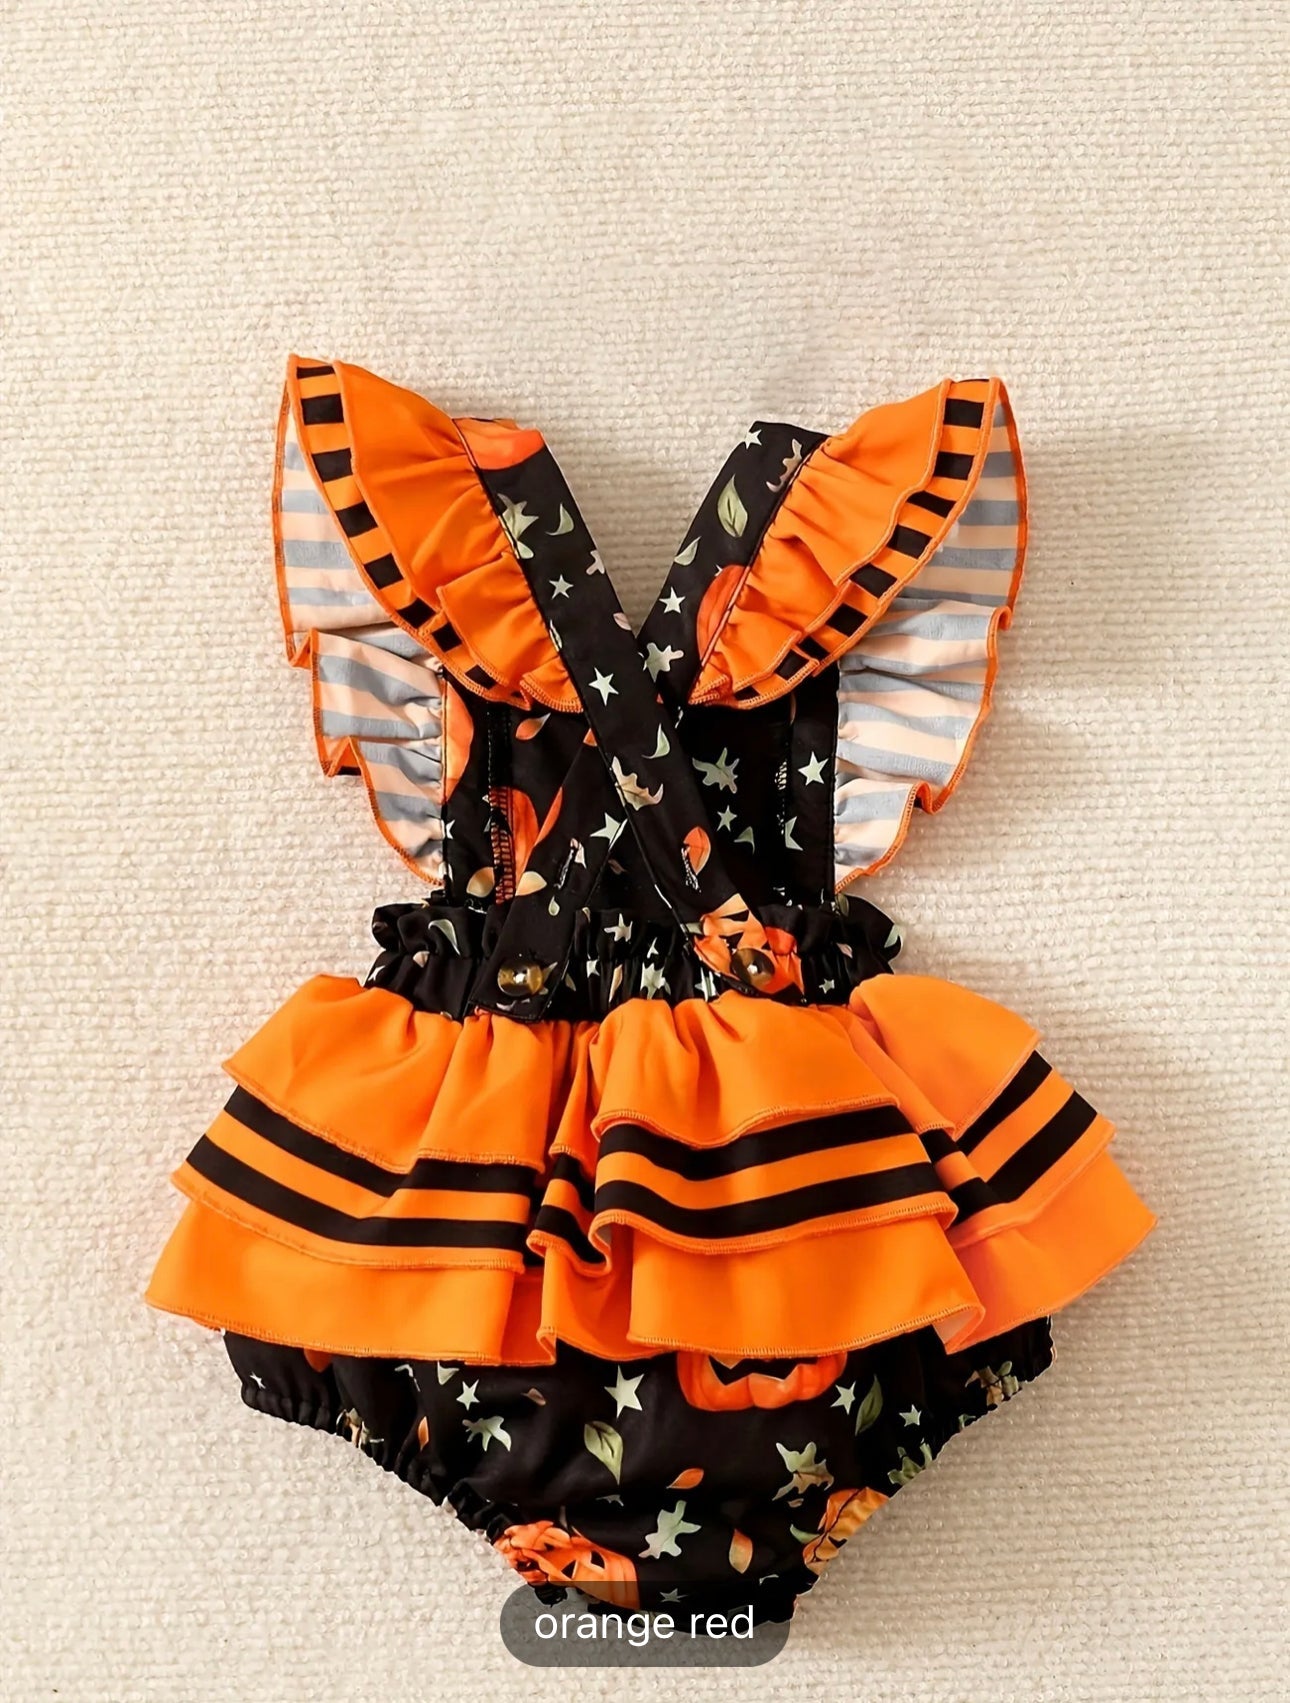 Adorable Halloween Outfit for Baby - 2pcs Romper & Headband Set!